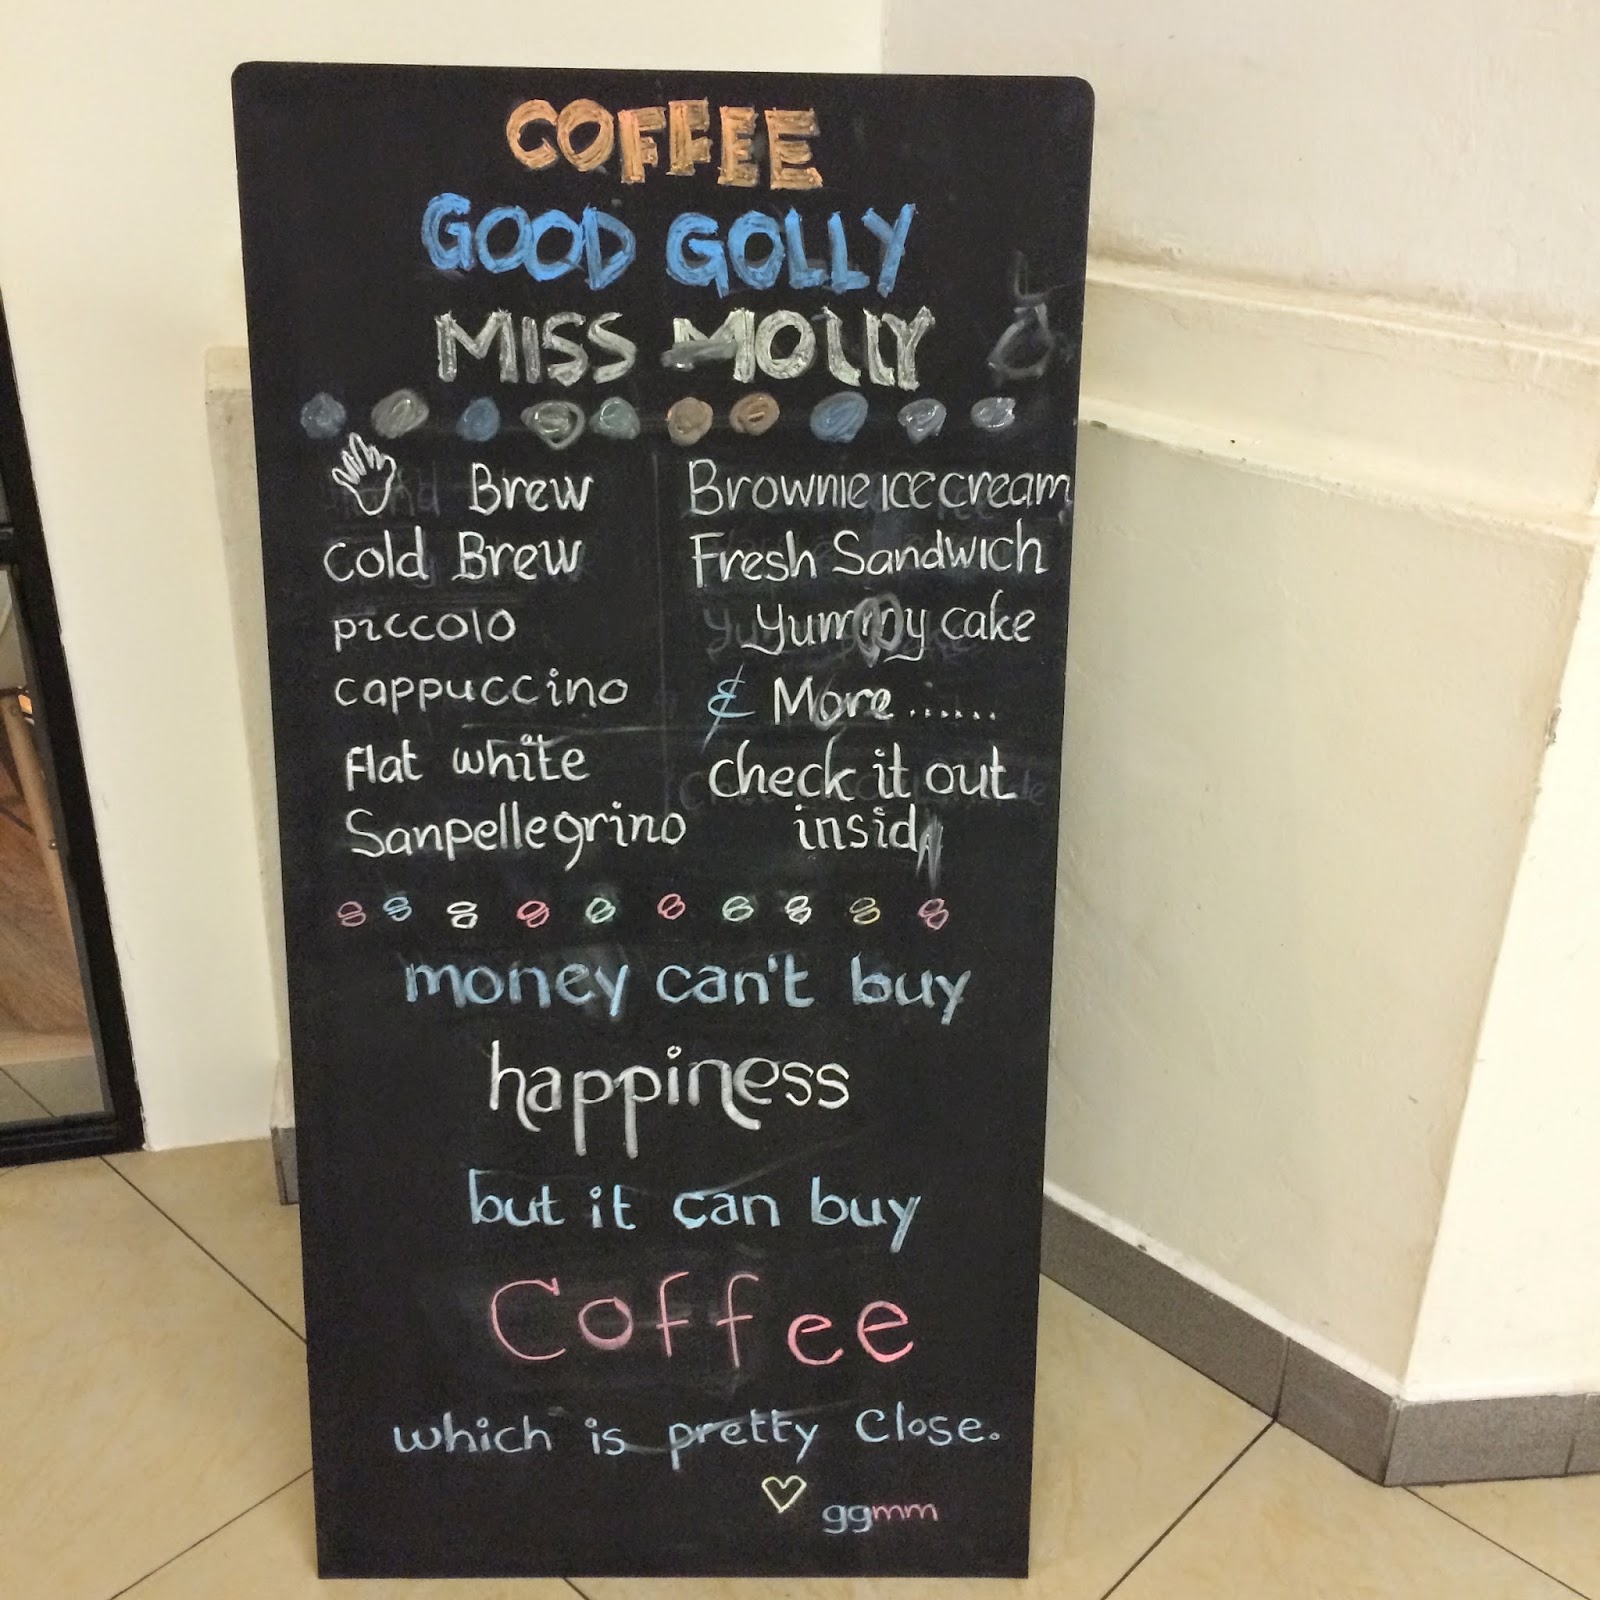 Love the quote " Money can t the happiness BUT it can Coffee " hihihi